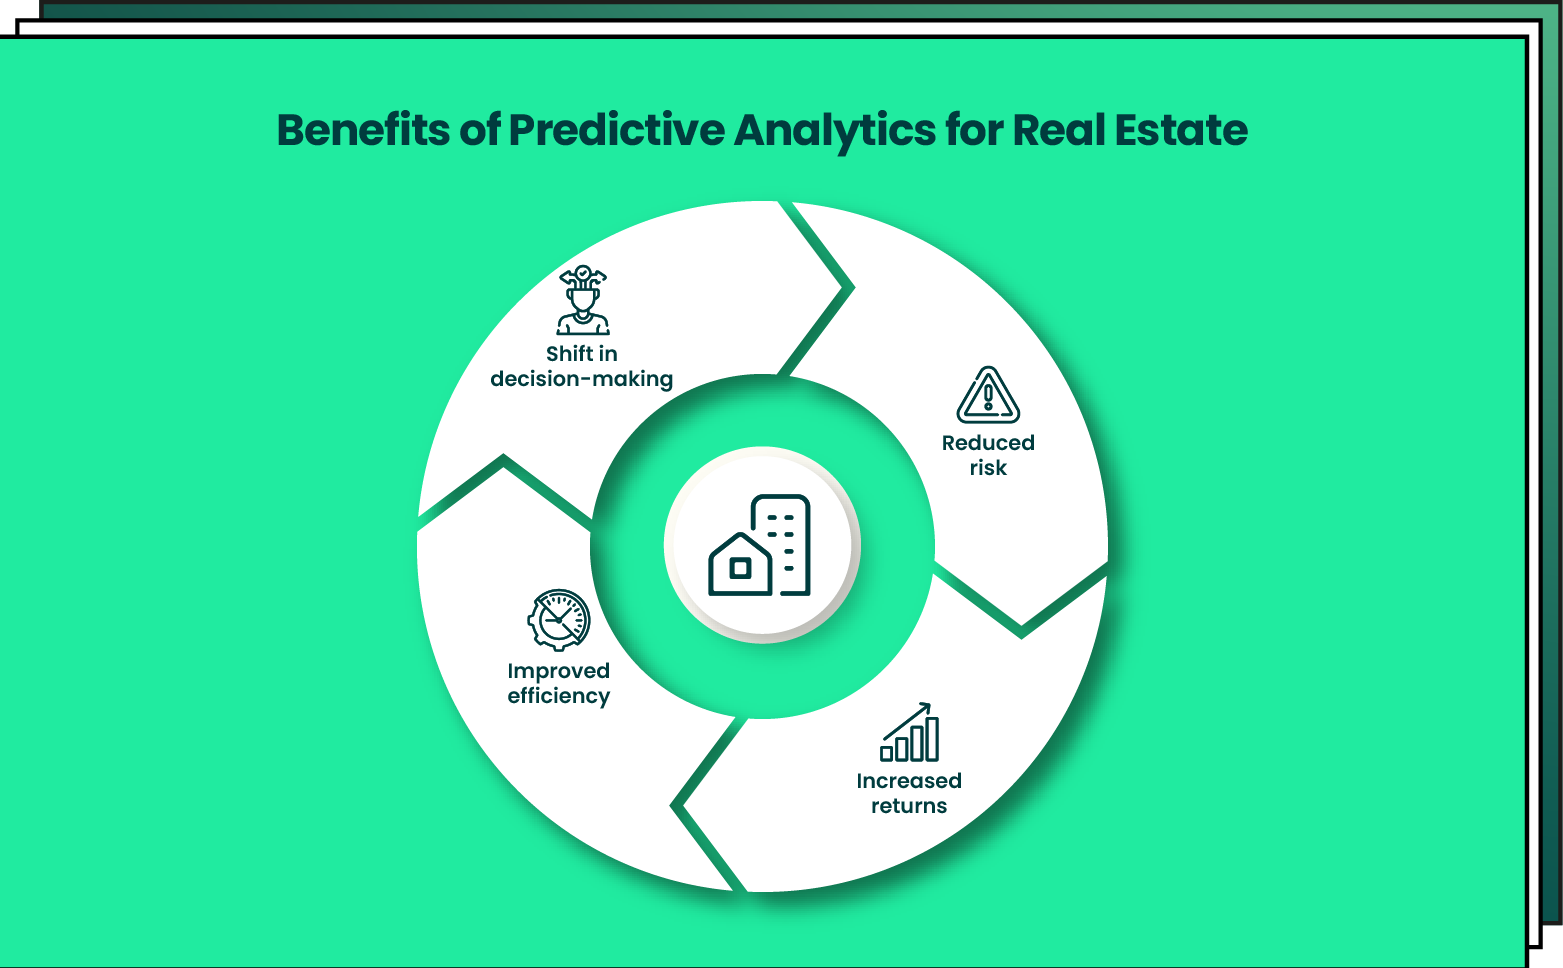 Benefits of Predictive Analytics for Real Estate